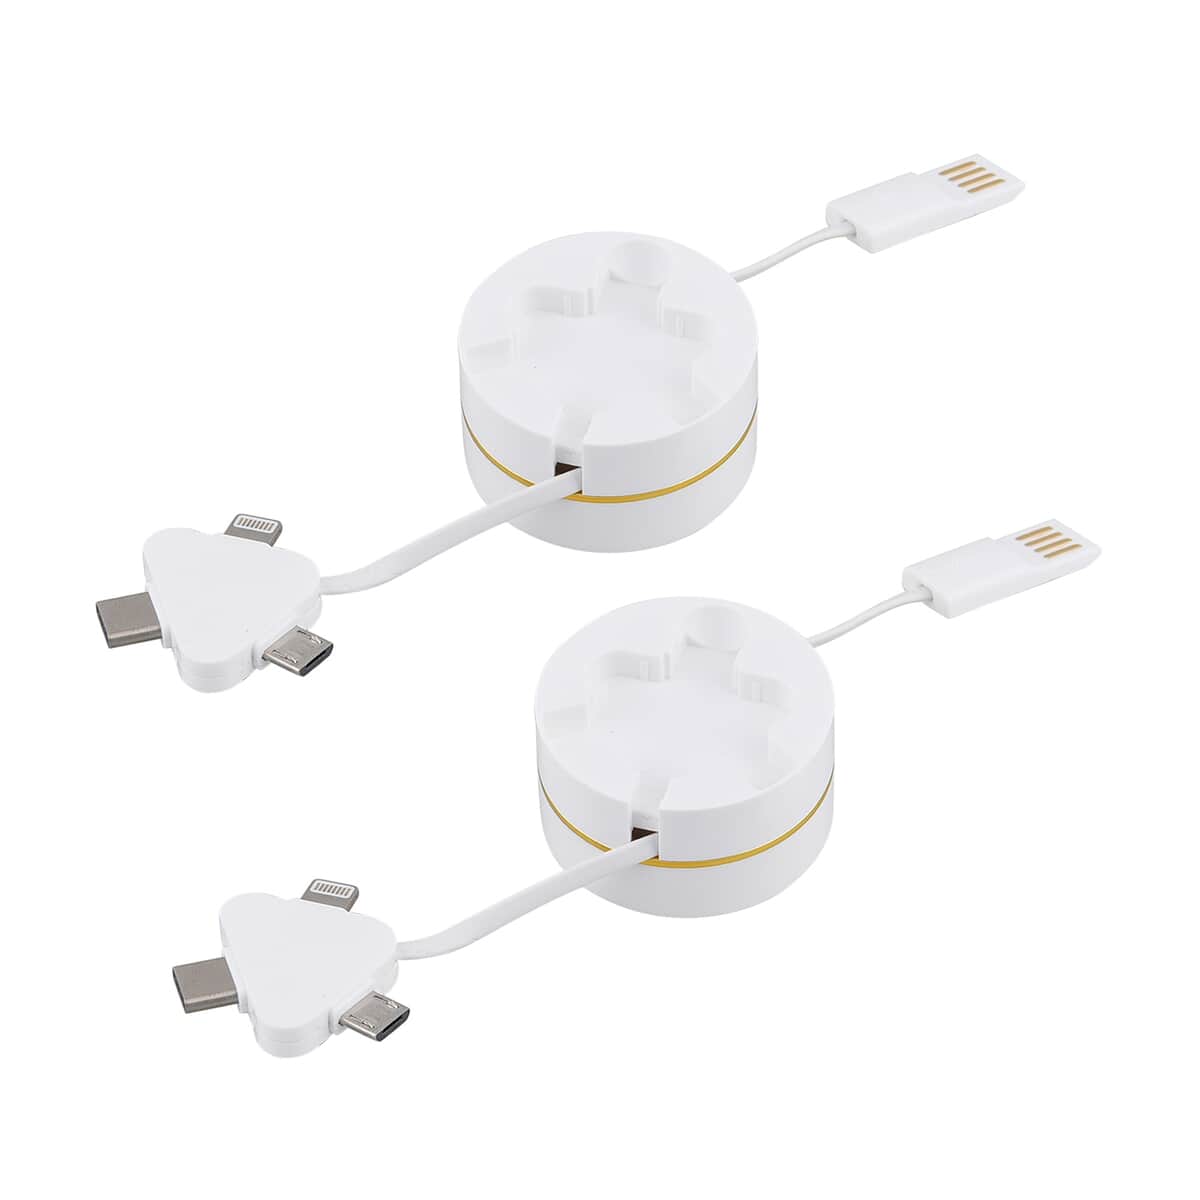 Buy Homesmart White 3-in-1 Retractable Charging Cable Box - Set of